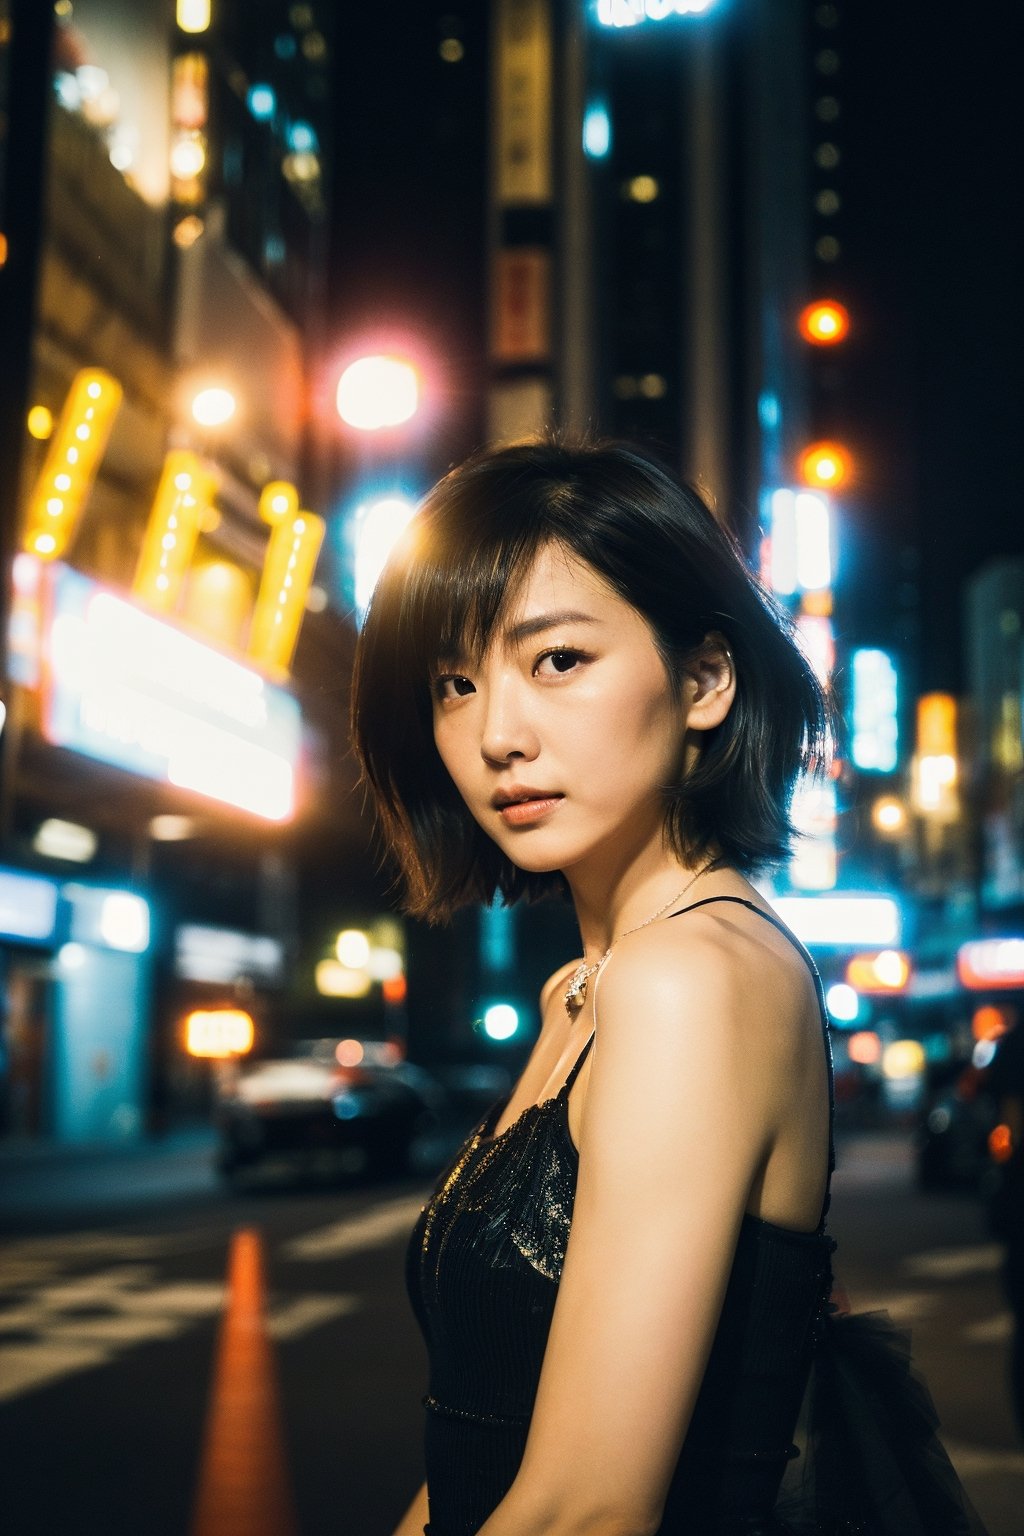 A 32-year-old Asian woman, noble, (((thin))), short hair, messy hair, Tulle Layered Tutu, necklace, 
Seductive Glance, High heels showcase, 
city, hong kong, Night, 
low key lighting, dutch angle, With Film Grain, Rule of Thirds, 